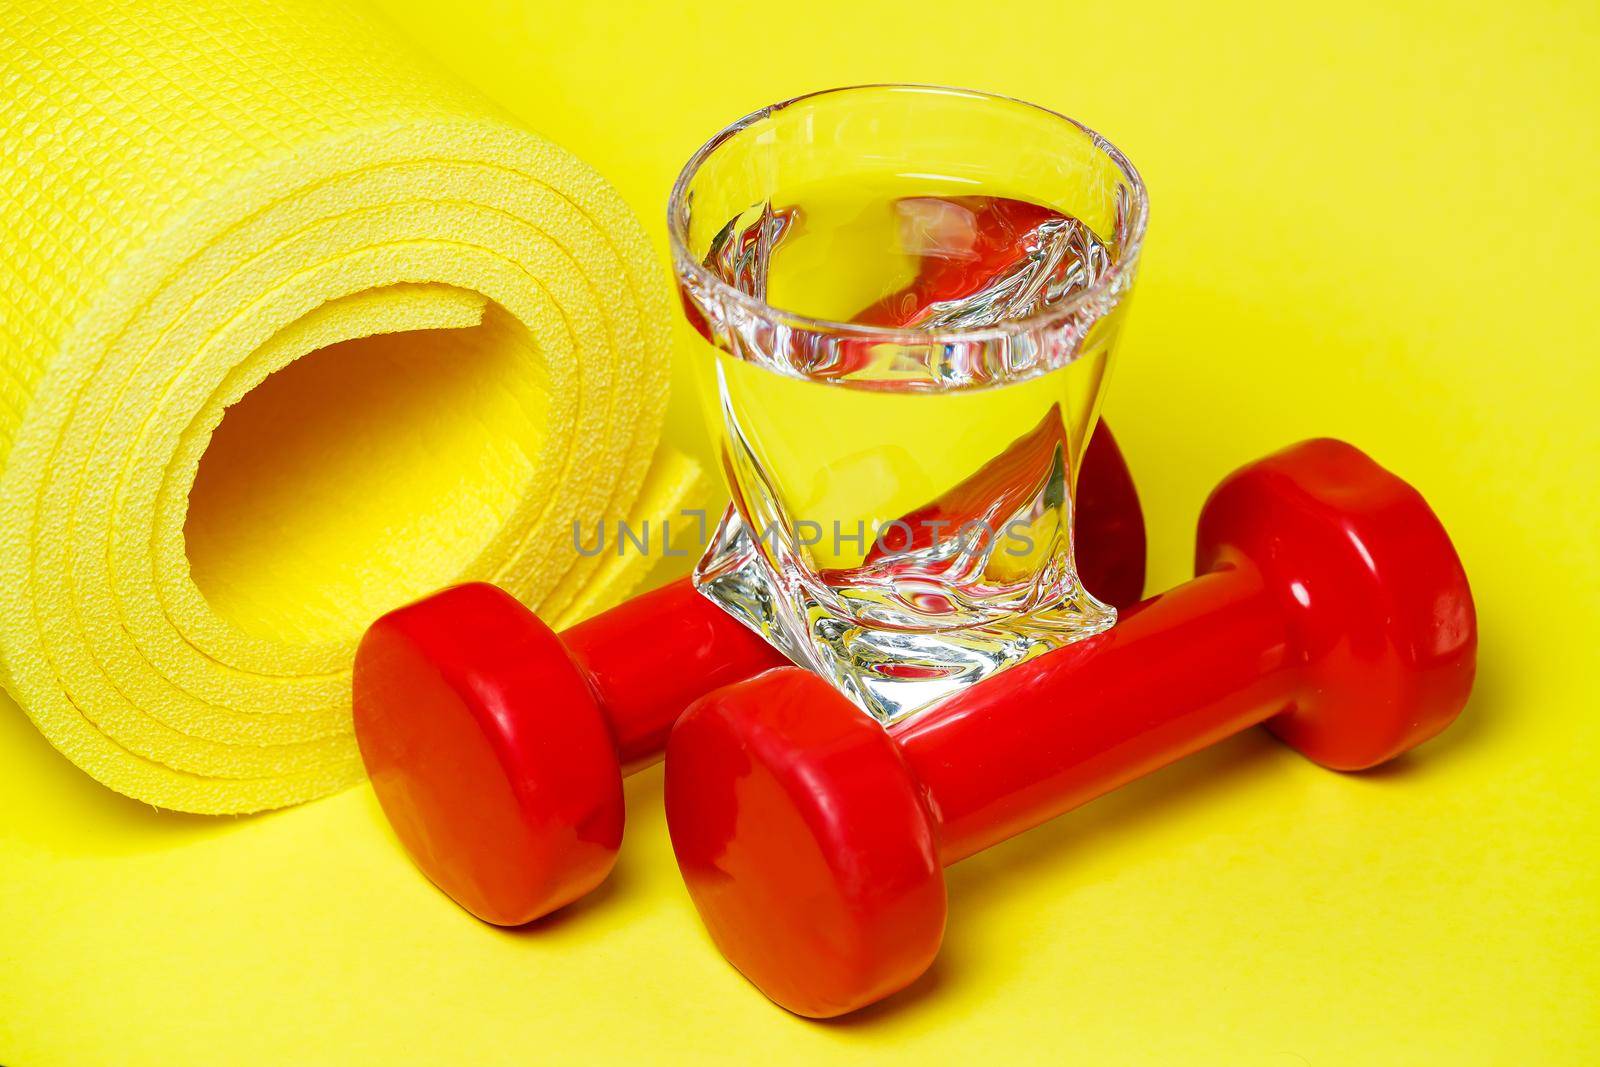 red dumbbells, a glass of water, a yellow rug, colored background, sports, energy drink, equipment for the gym by Dmitrytph